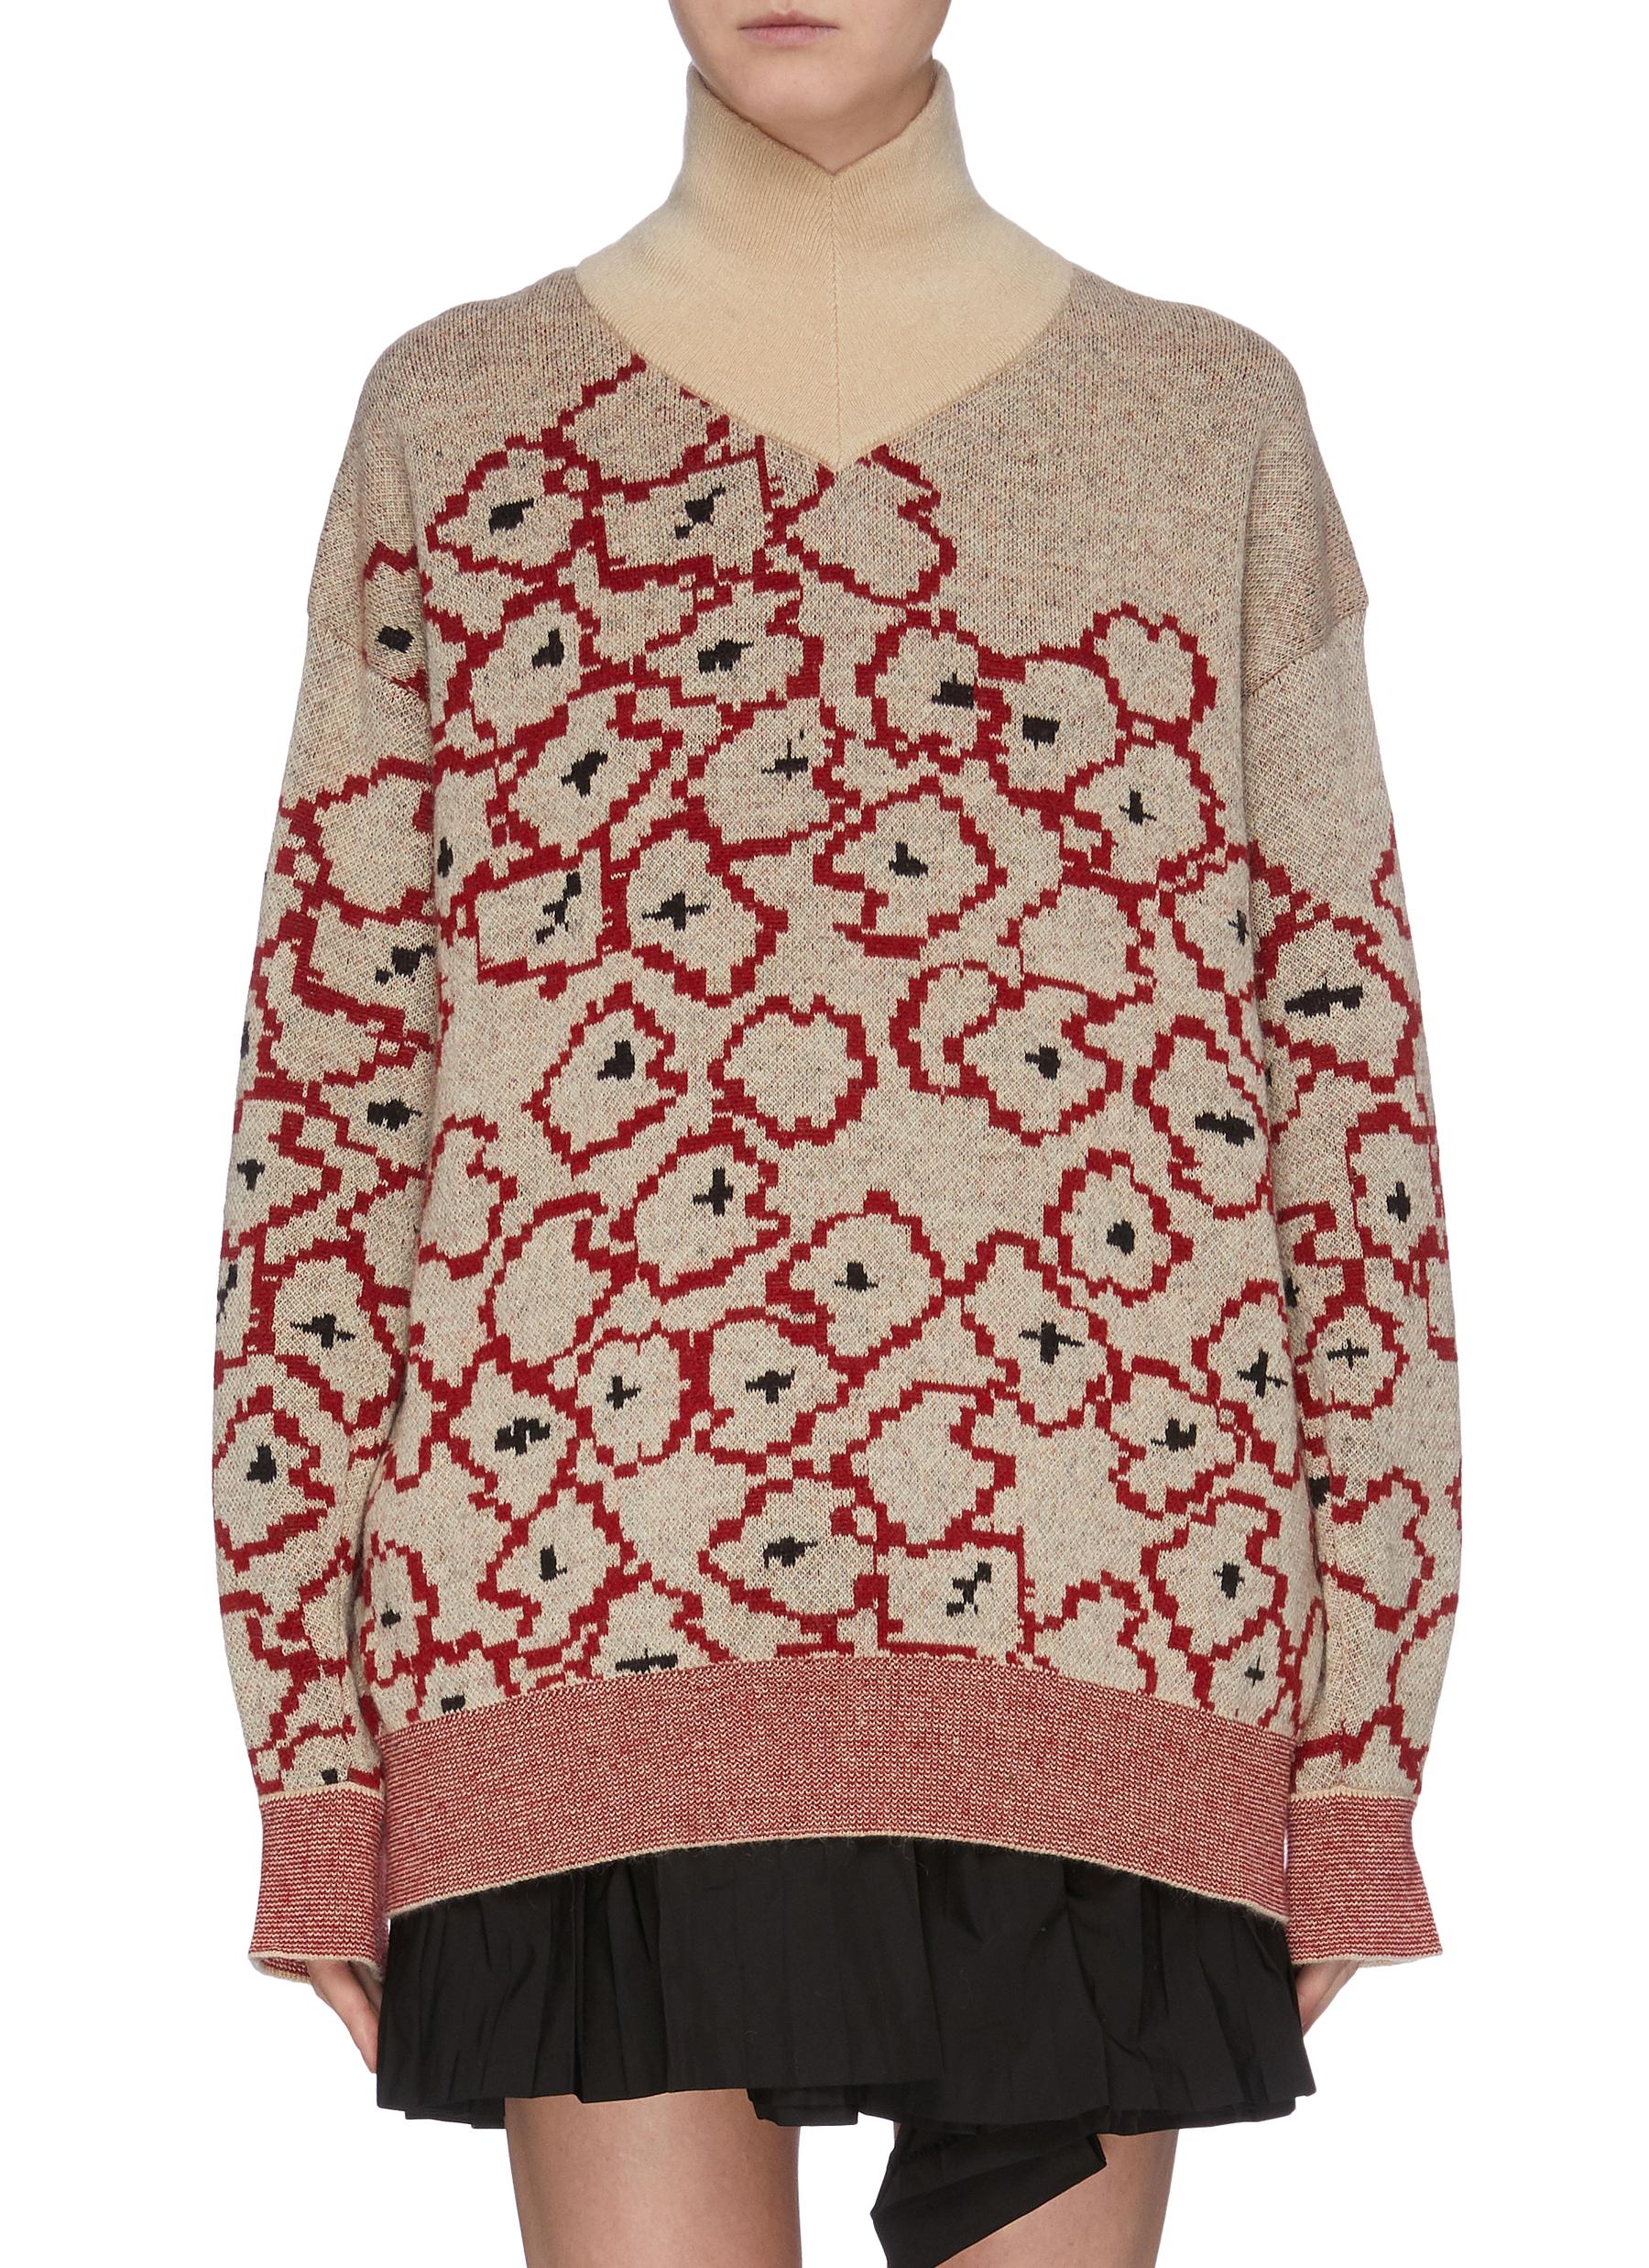 Contrast waist floral jacquard turtleneck sweater by Toga Archives ...